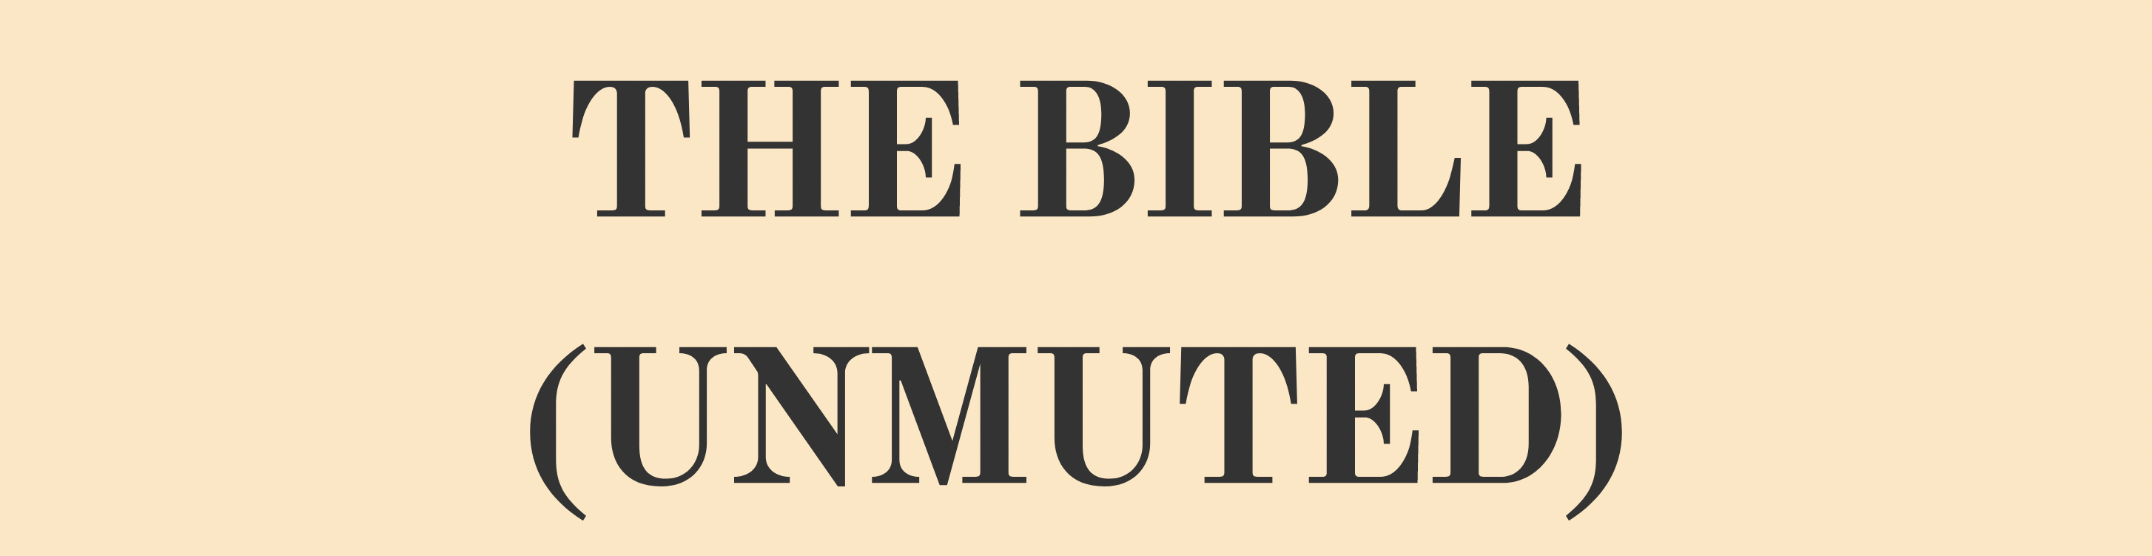 The Bible Unmuted: Episode 1